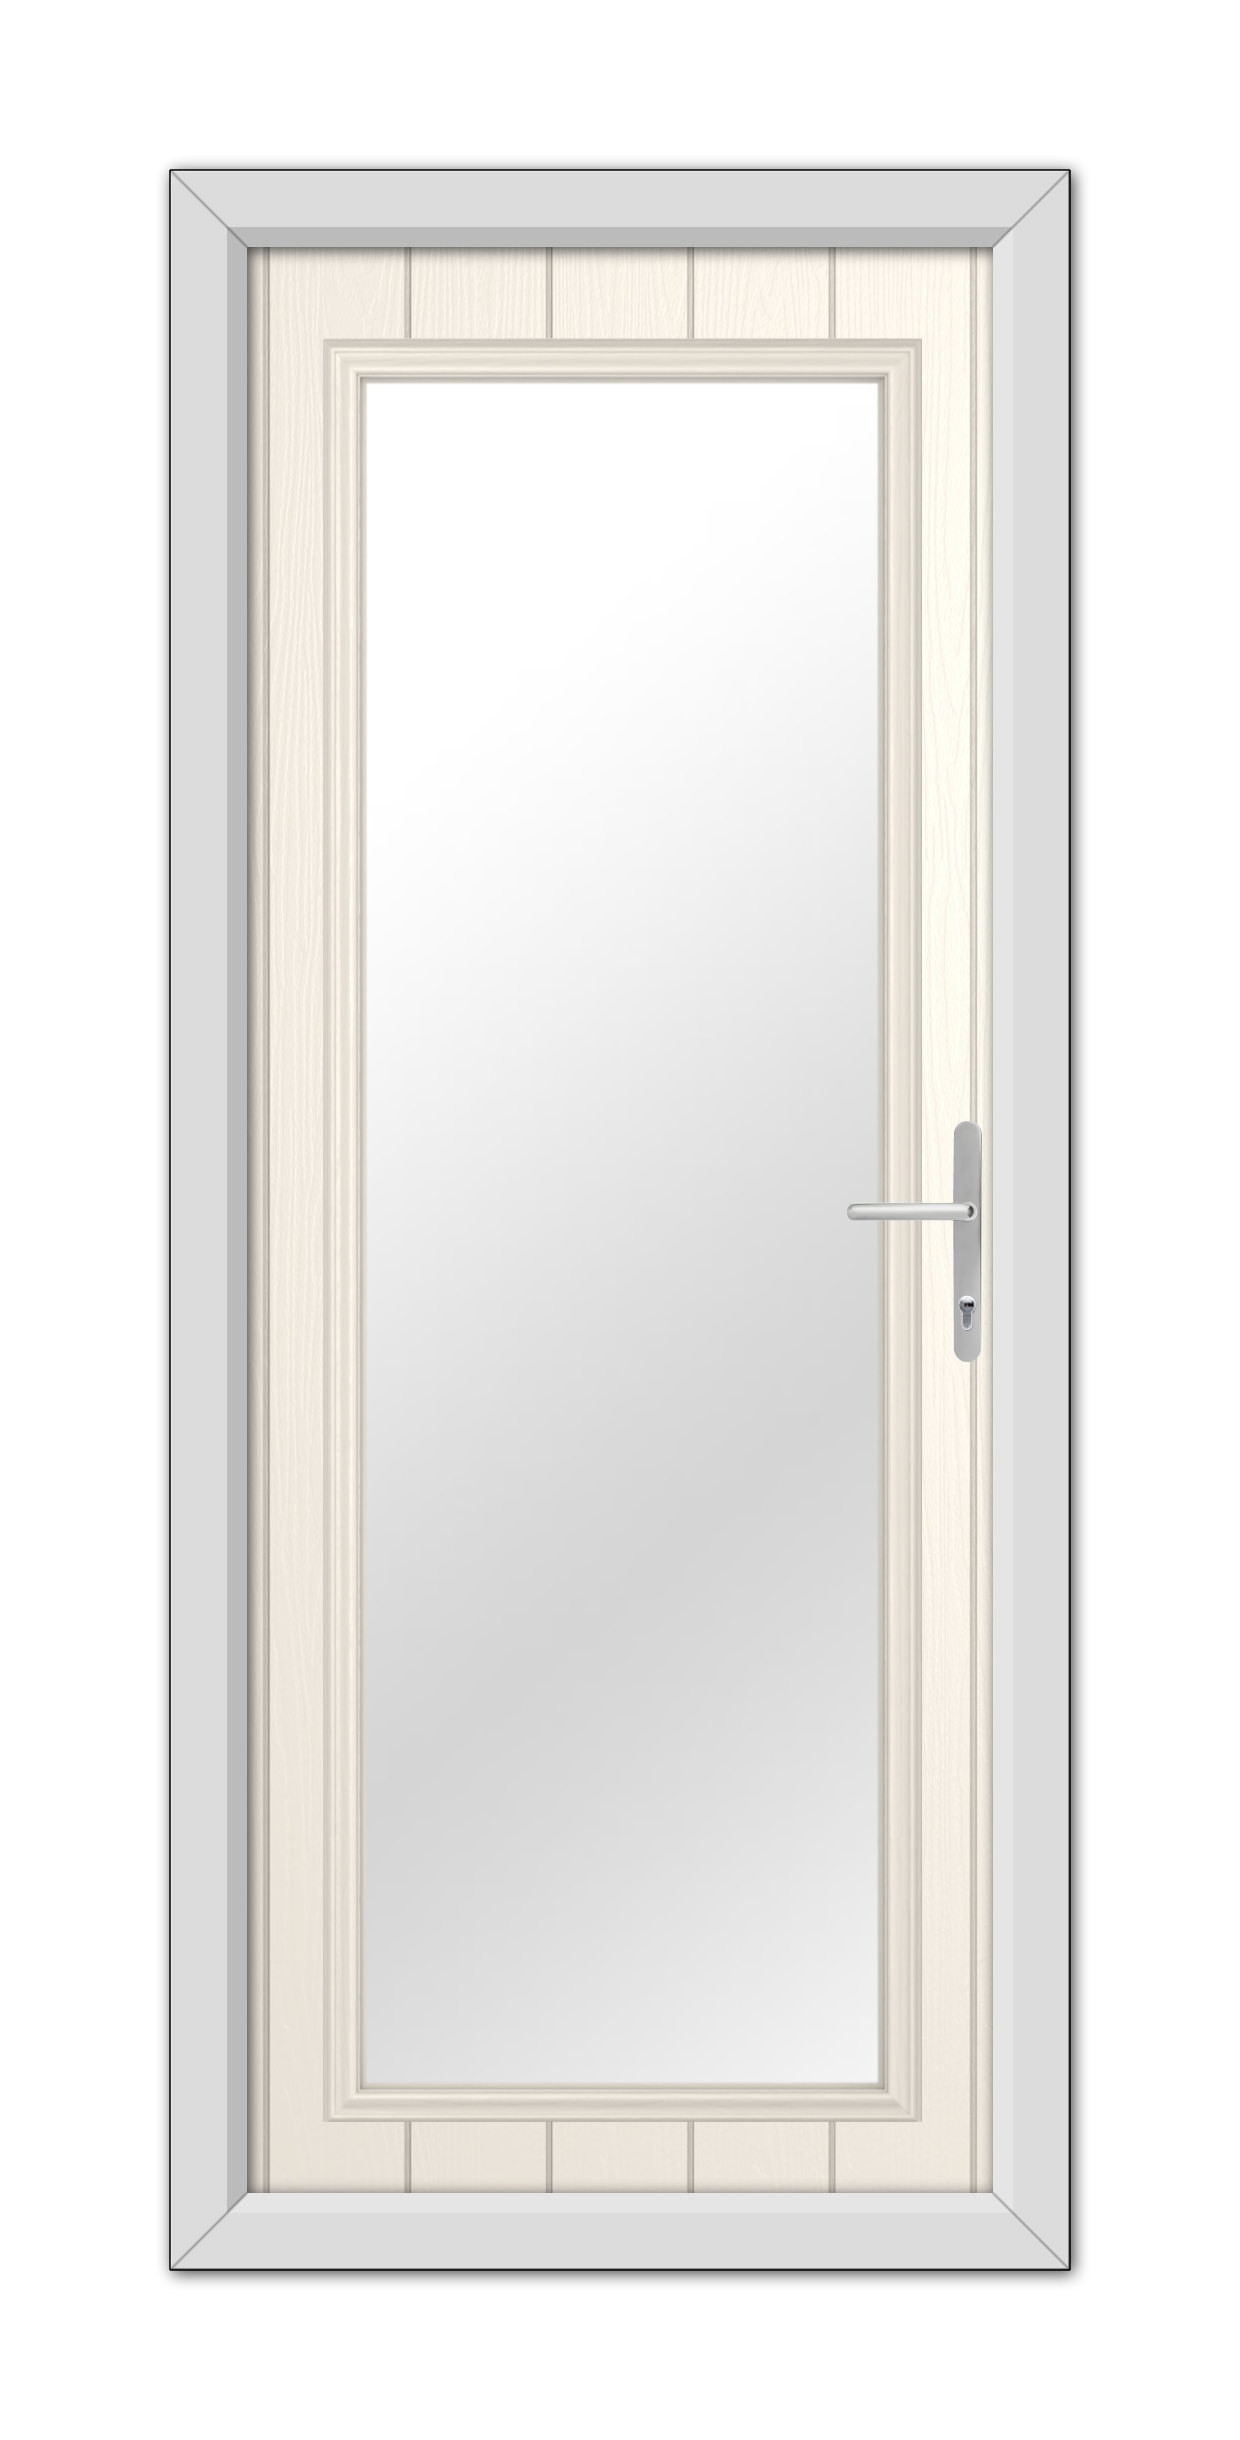 Modern White Foil Hatton Composite Door 48mm Timber Core with a silver handle and a large glass panel, set in a light-colored wooden frame against a white background.